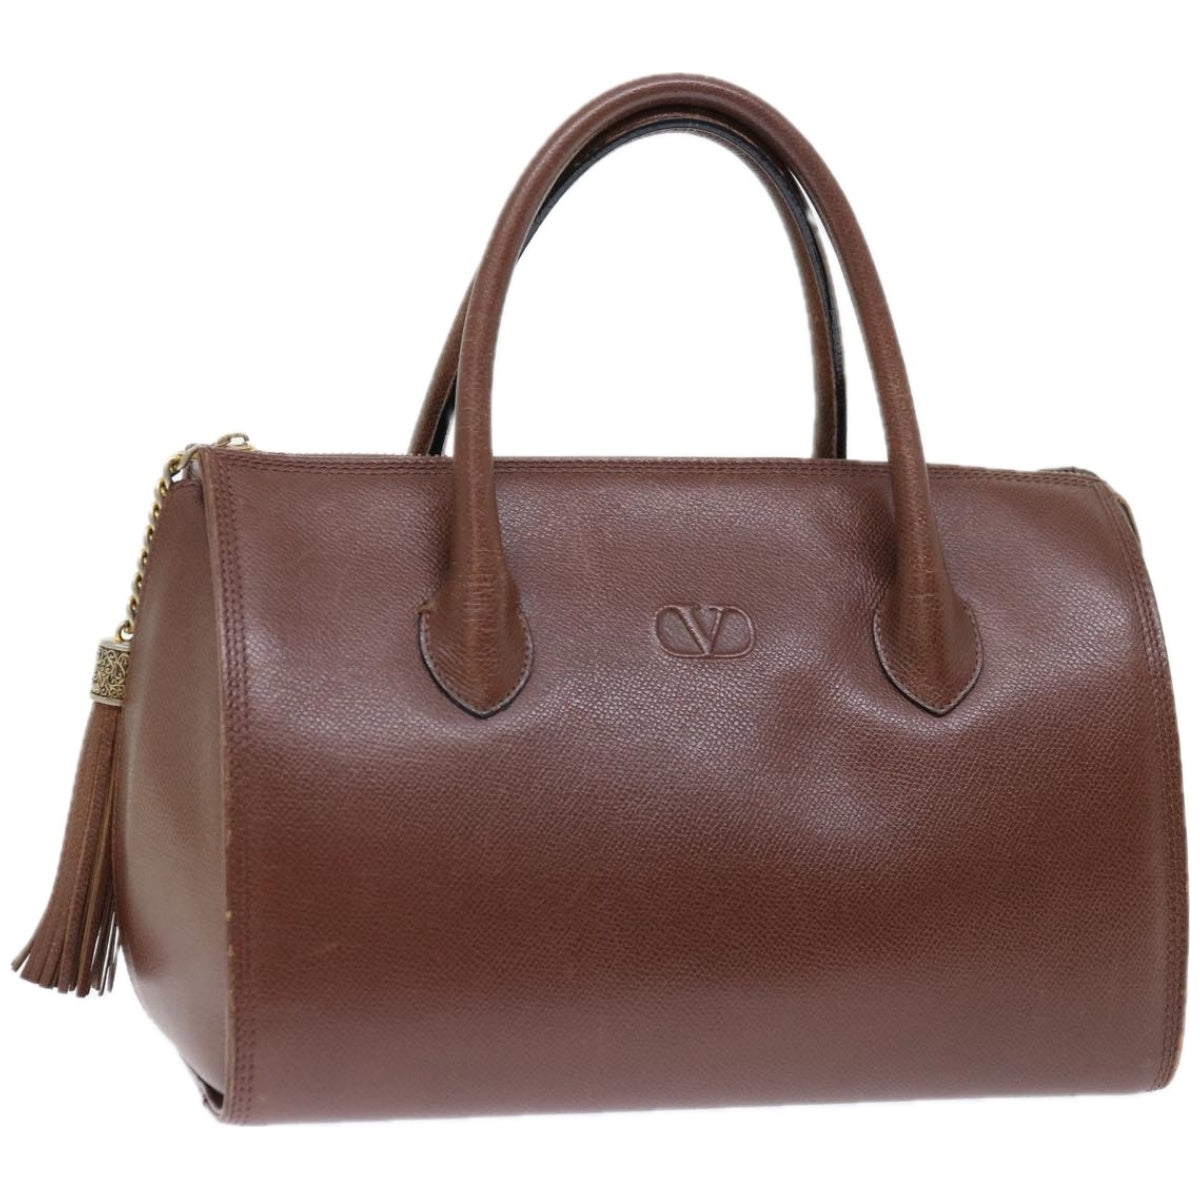 VALENTINO Hand Bag Leather Brown Auth 67071